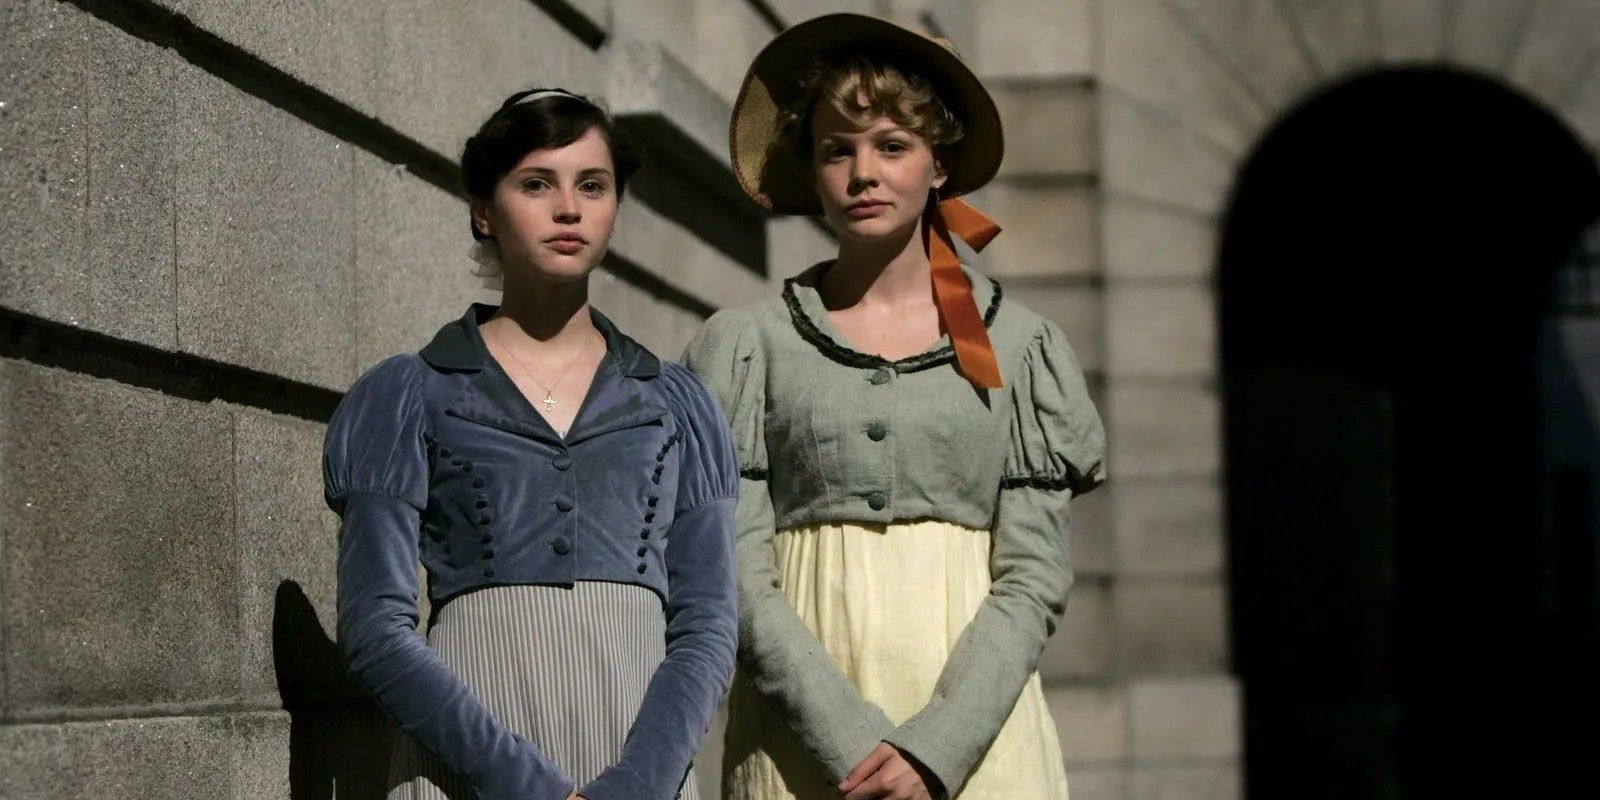 Felicity Jones as Catherine Morland and Carey Mulligan as Isabella in Northanger Abbey